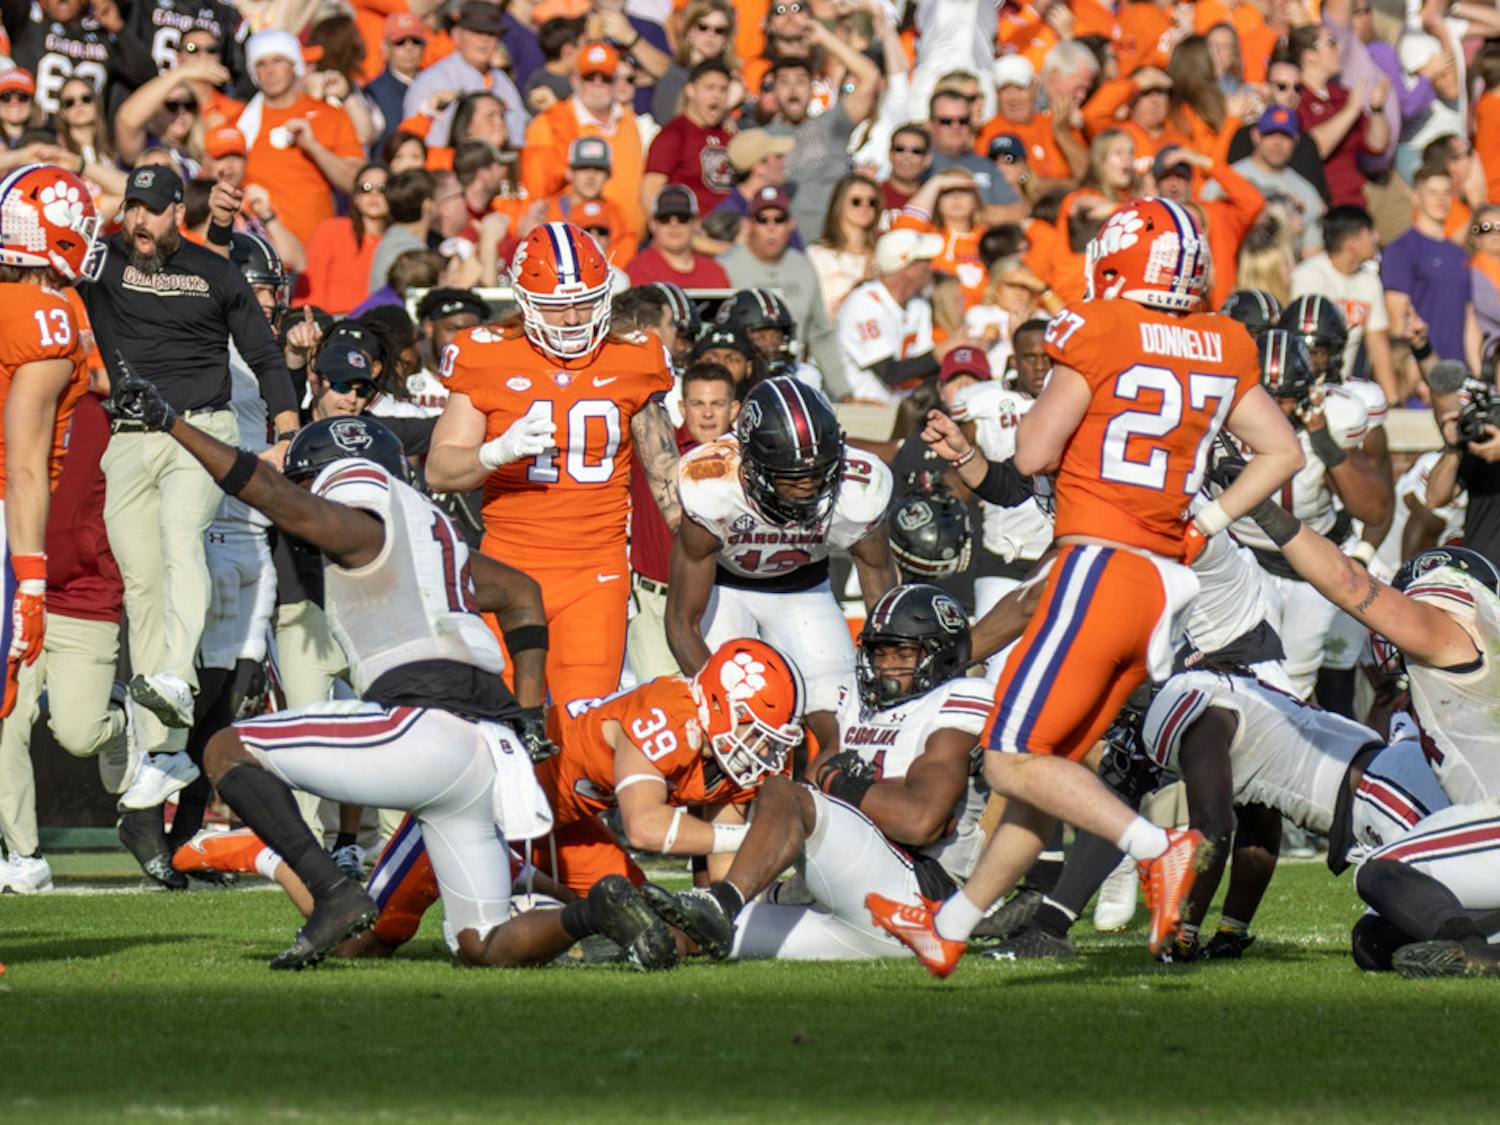 Freshman defensive back Nick Emmanwori holding a fumble by Clemson on Nov. 28, 2022 at Memorial Stadium. The Gamecocks picked up two fumbles and an interception from Clemson.